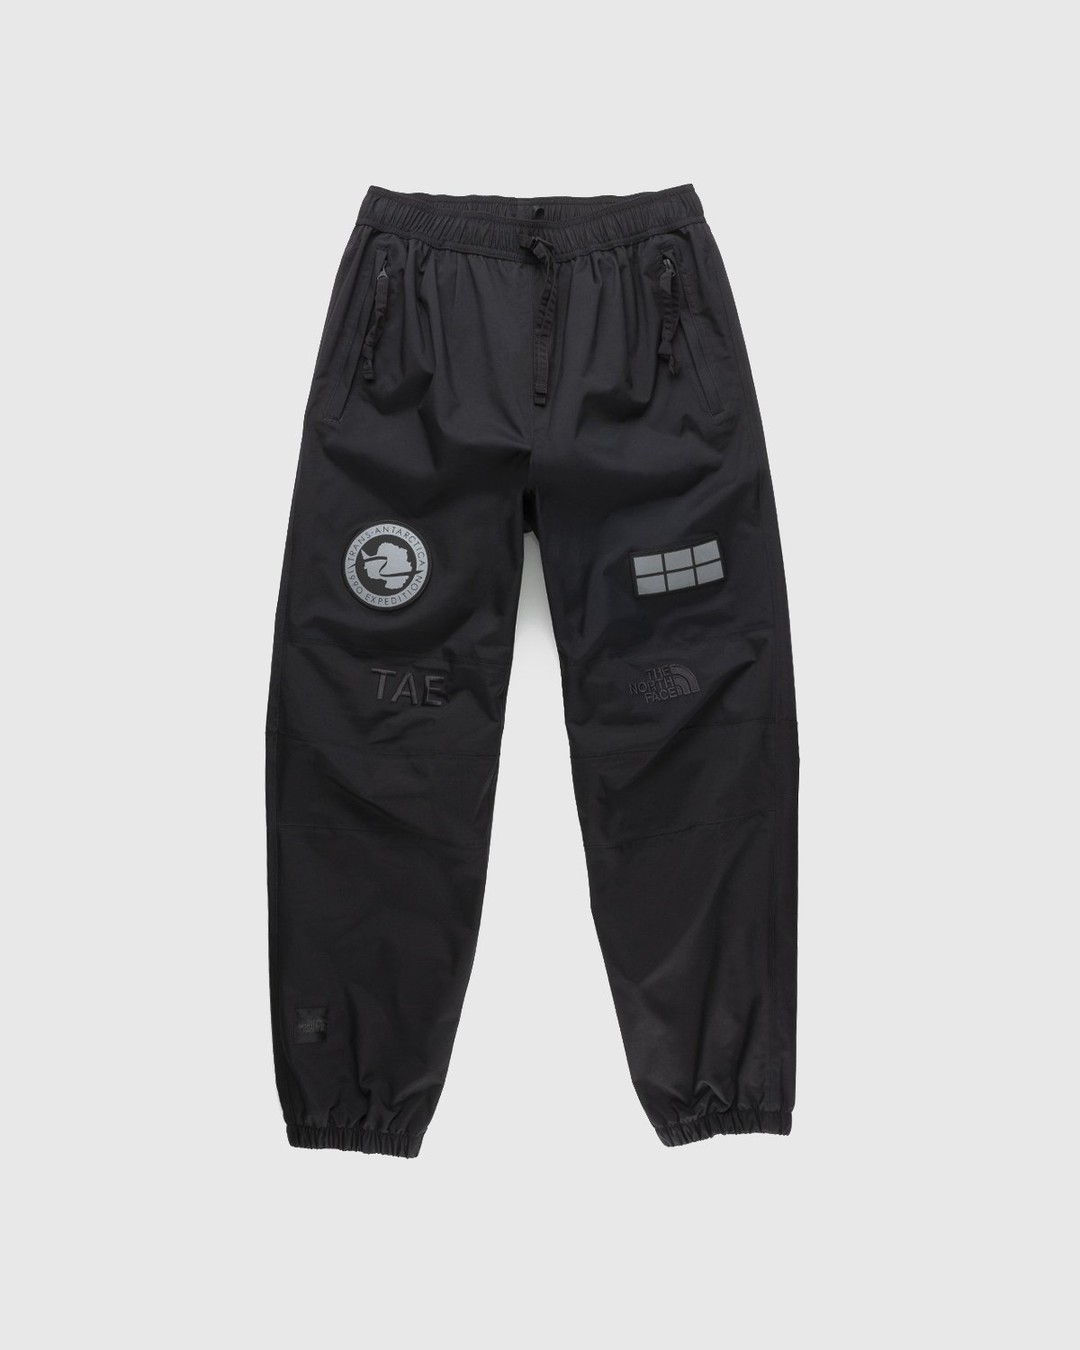 The North Face – Trans Antarctica Expedition Pant Black